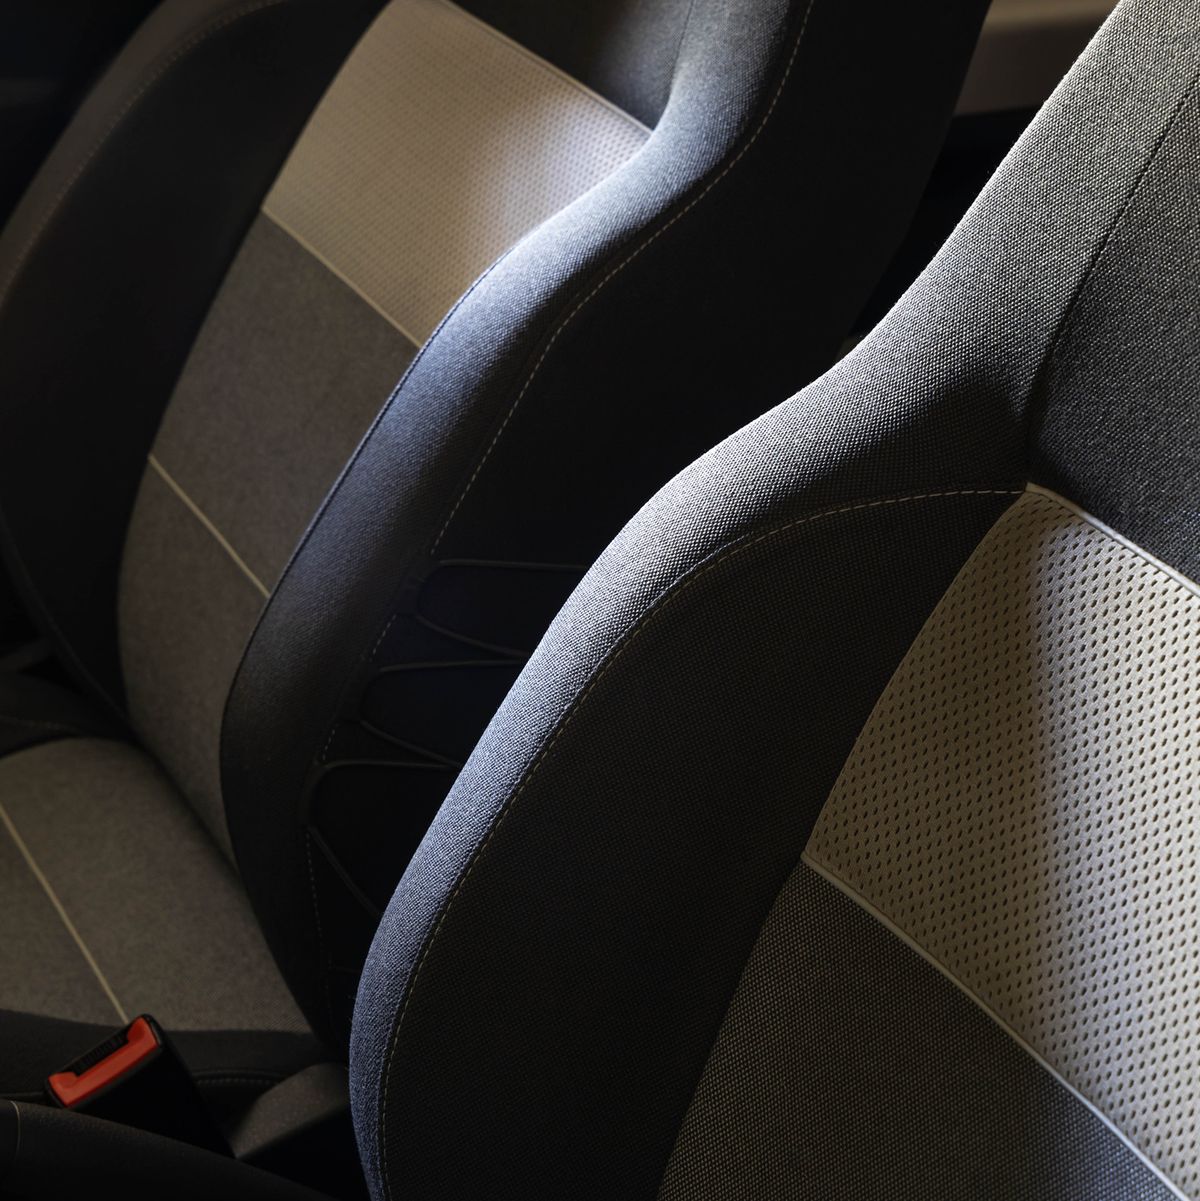 Top 5 Reasons to Invest in Quality Seat Cushions for Your Car